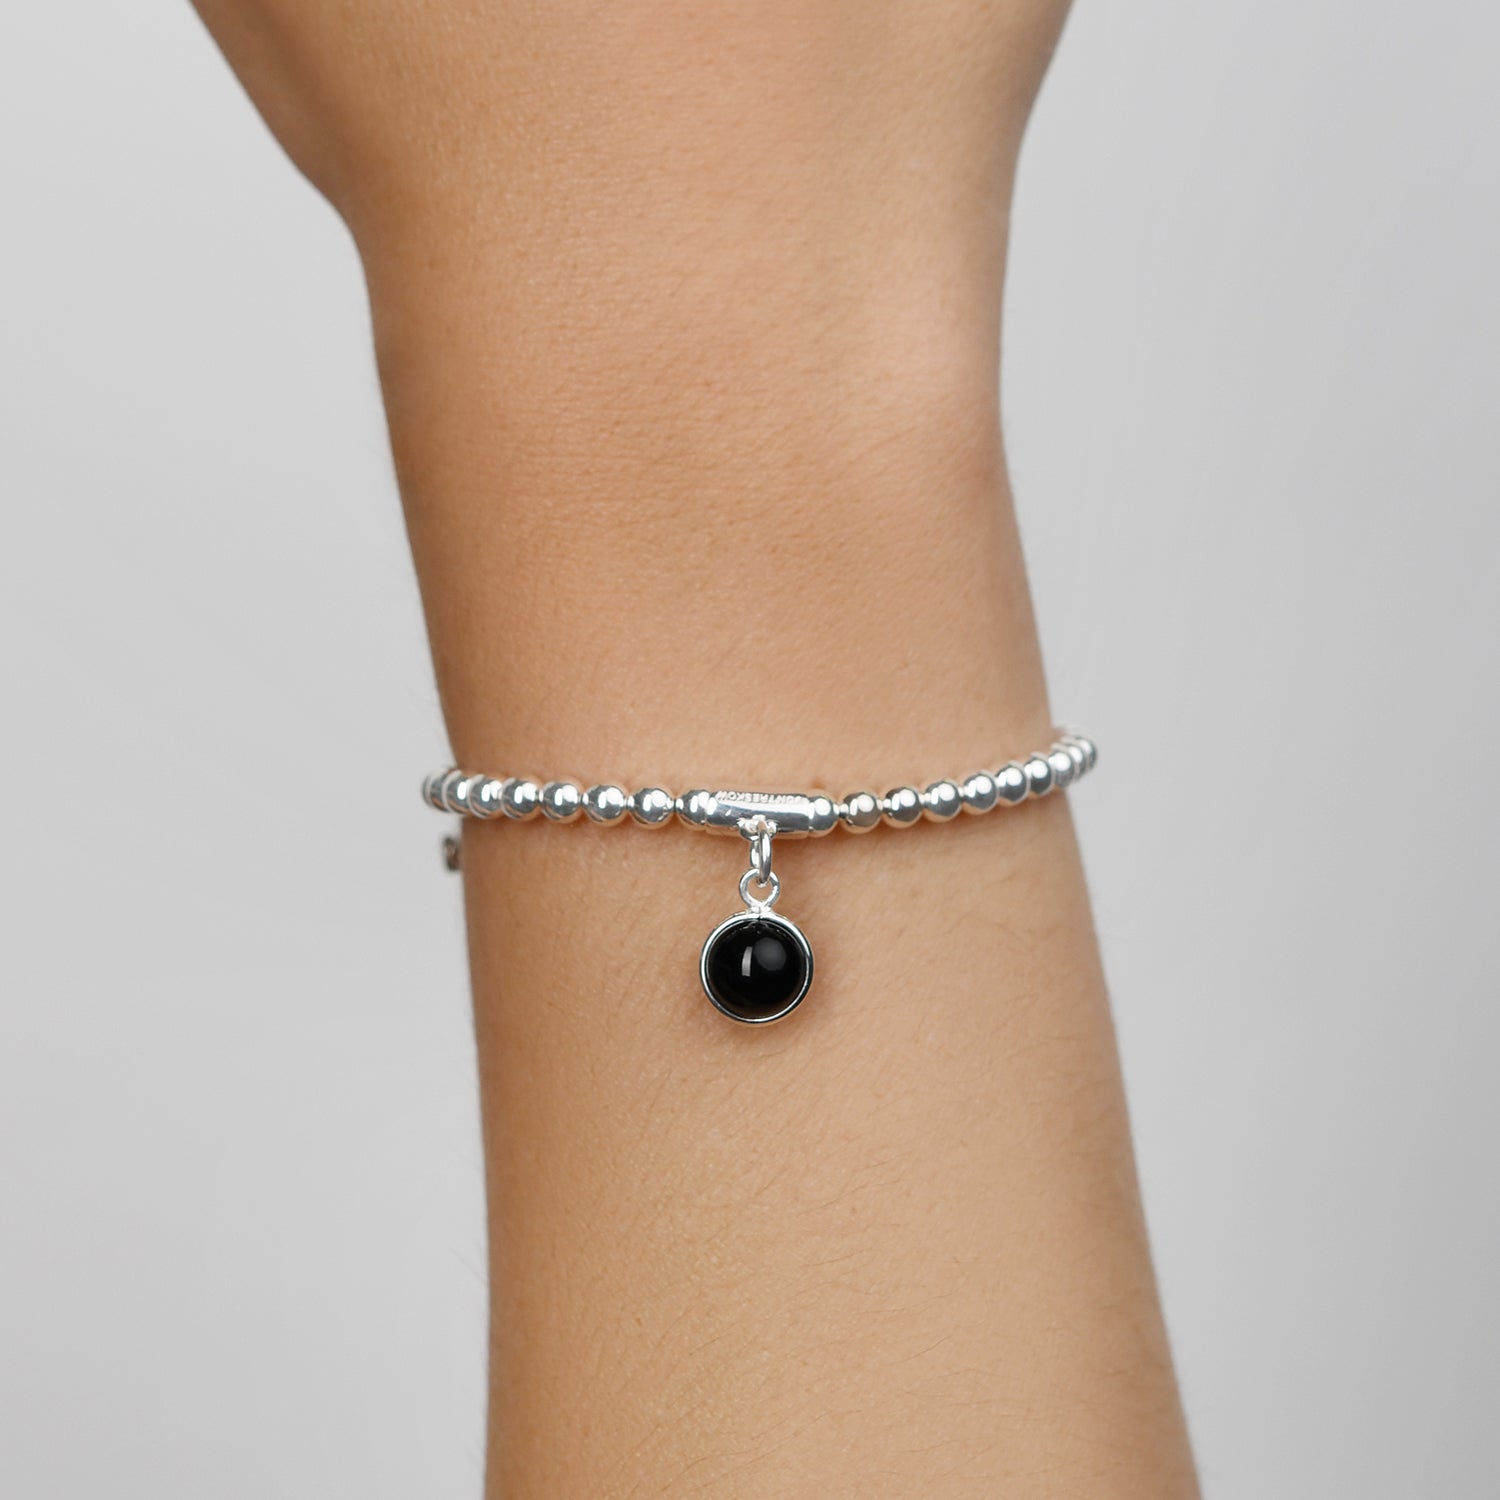 Sterling Silver 4mm Stretchy Ball Bracelet With 8mm Round Black Onyx Bead Charm.